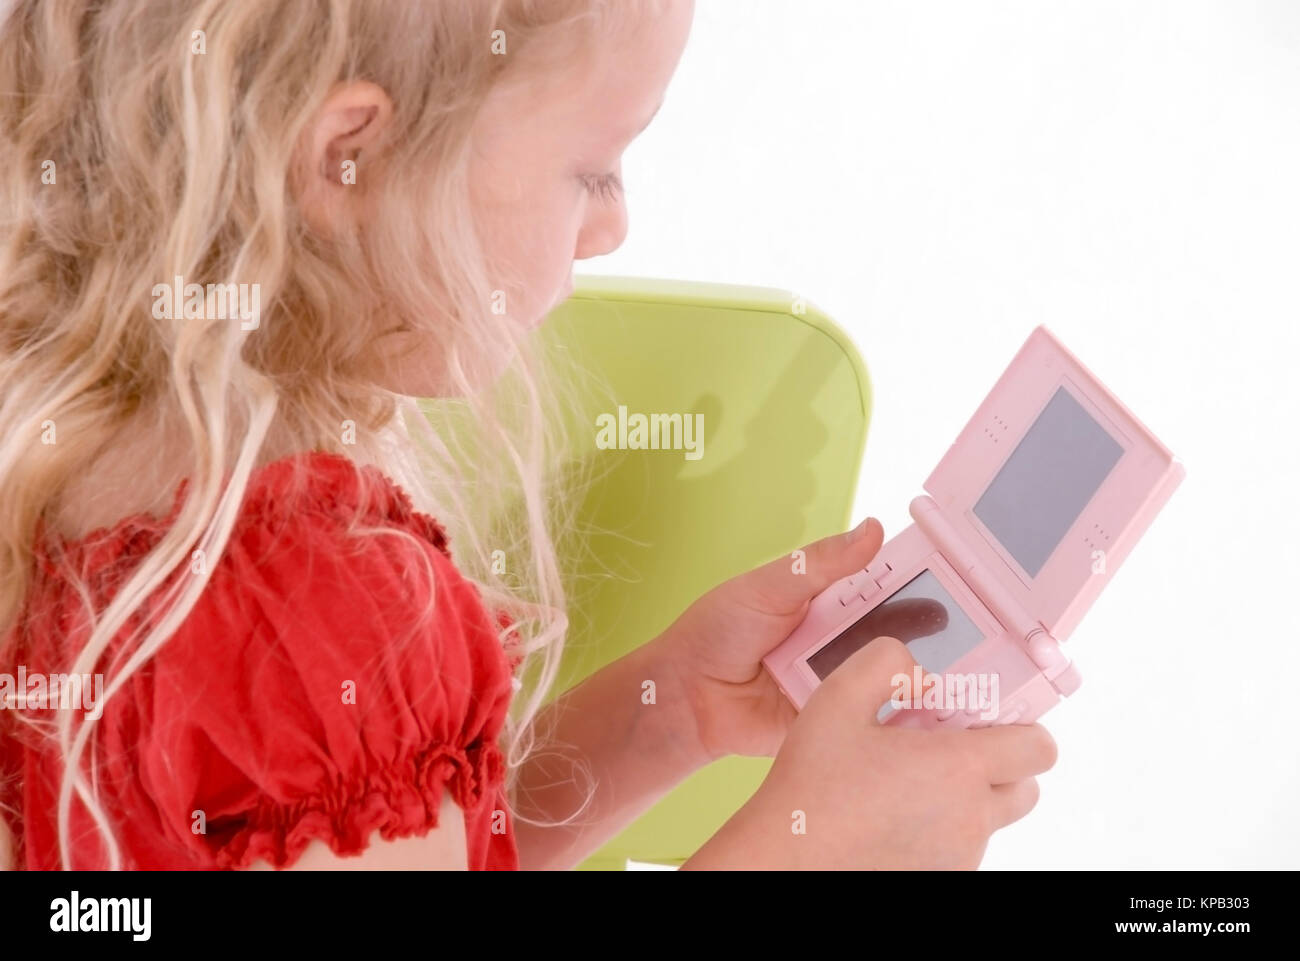 Model release, Maedchen mit Computerspiel - girl with computer game Stock Photo